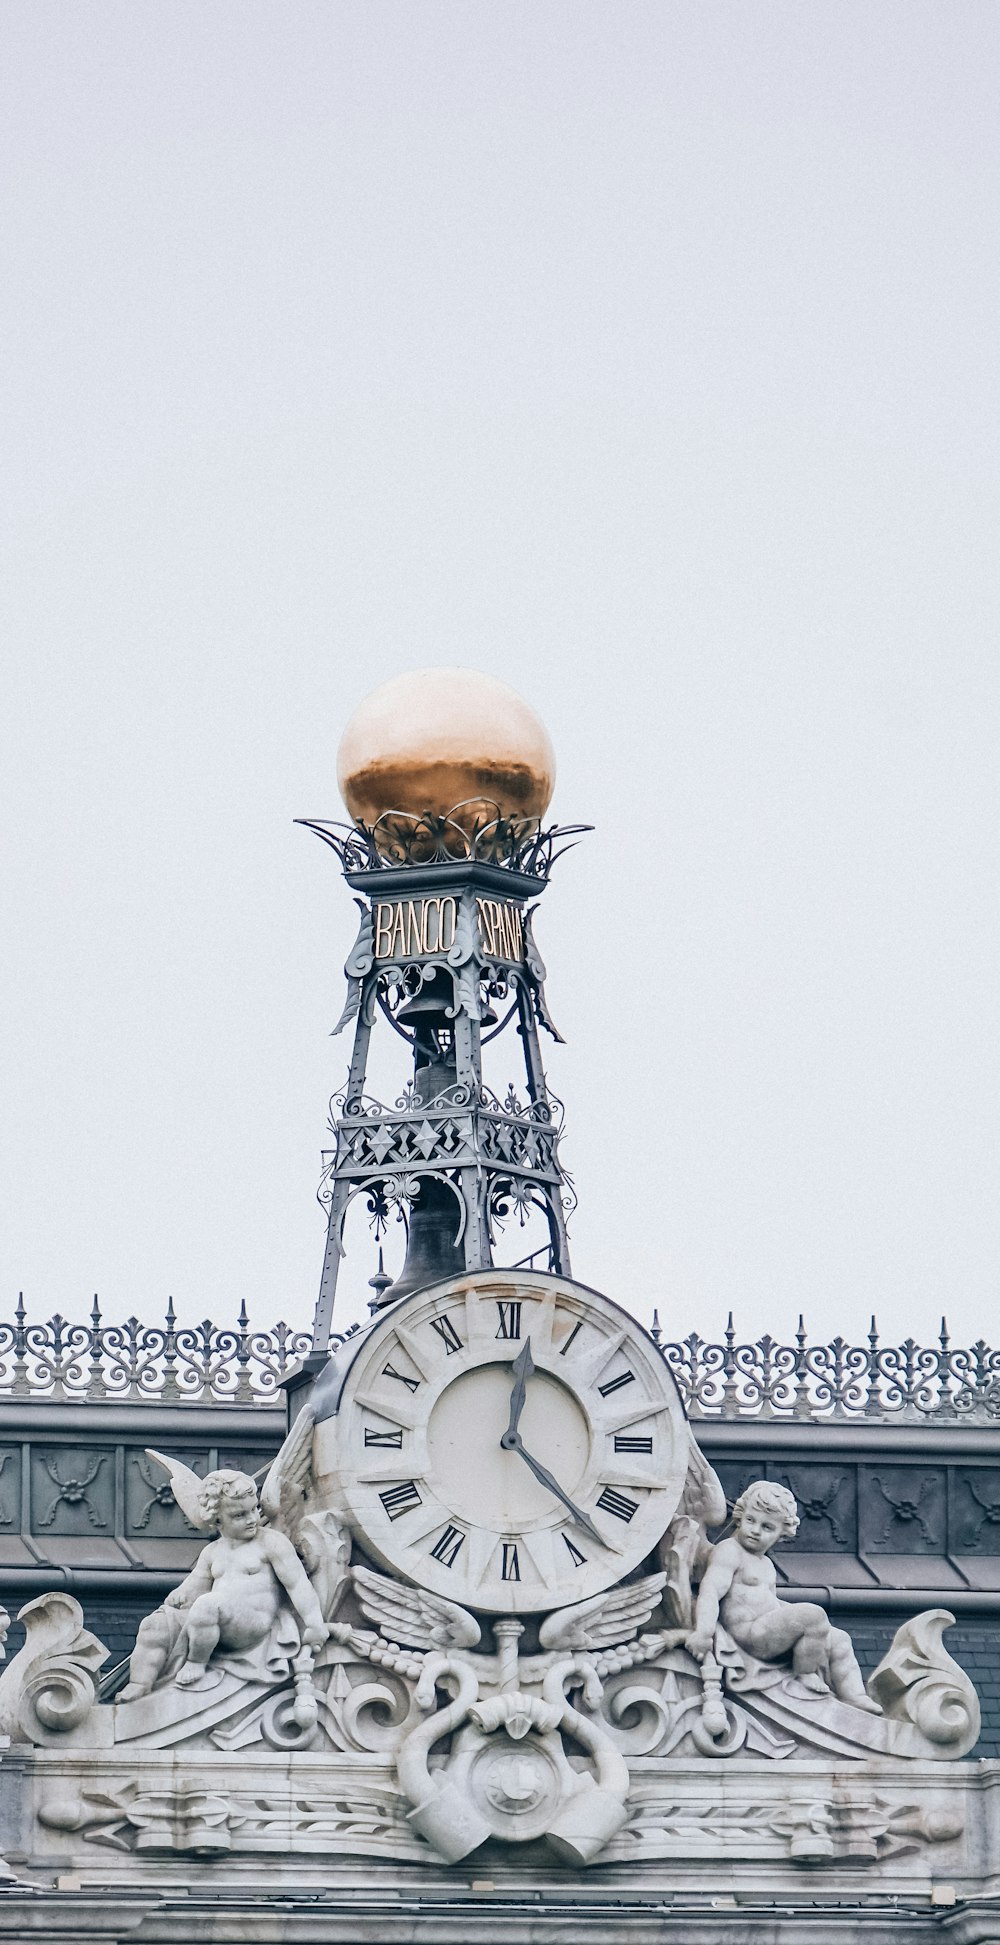 a large clock on top of a building